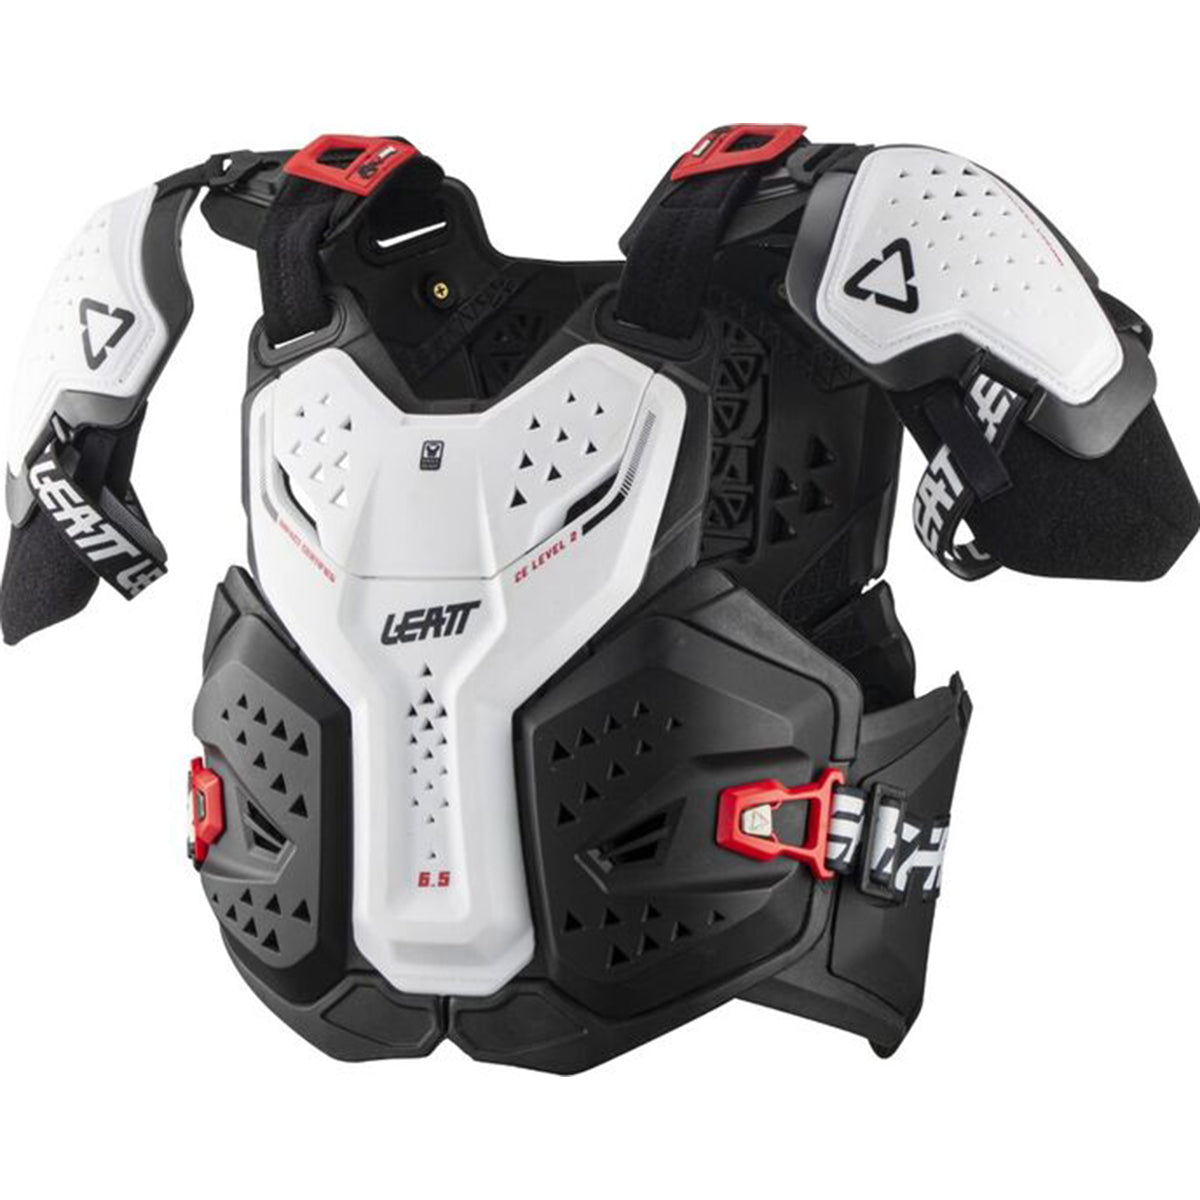 Leatt 6.5 Pro Chest Protector Adult Off-Road Body Armor-5021400220